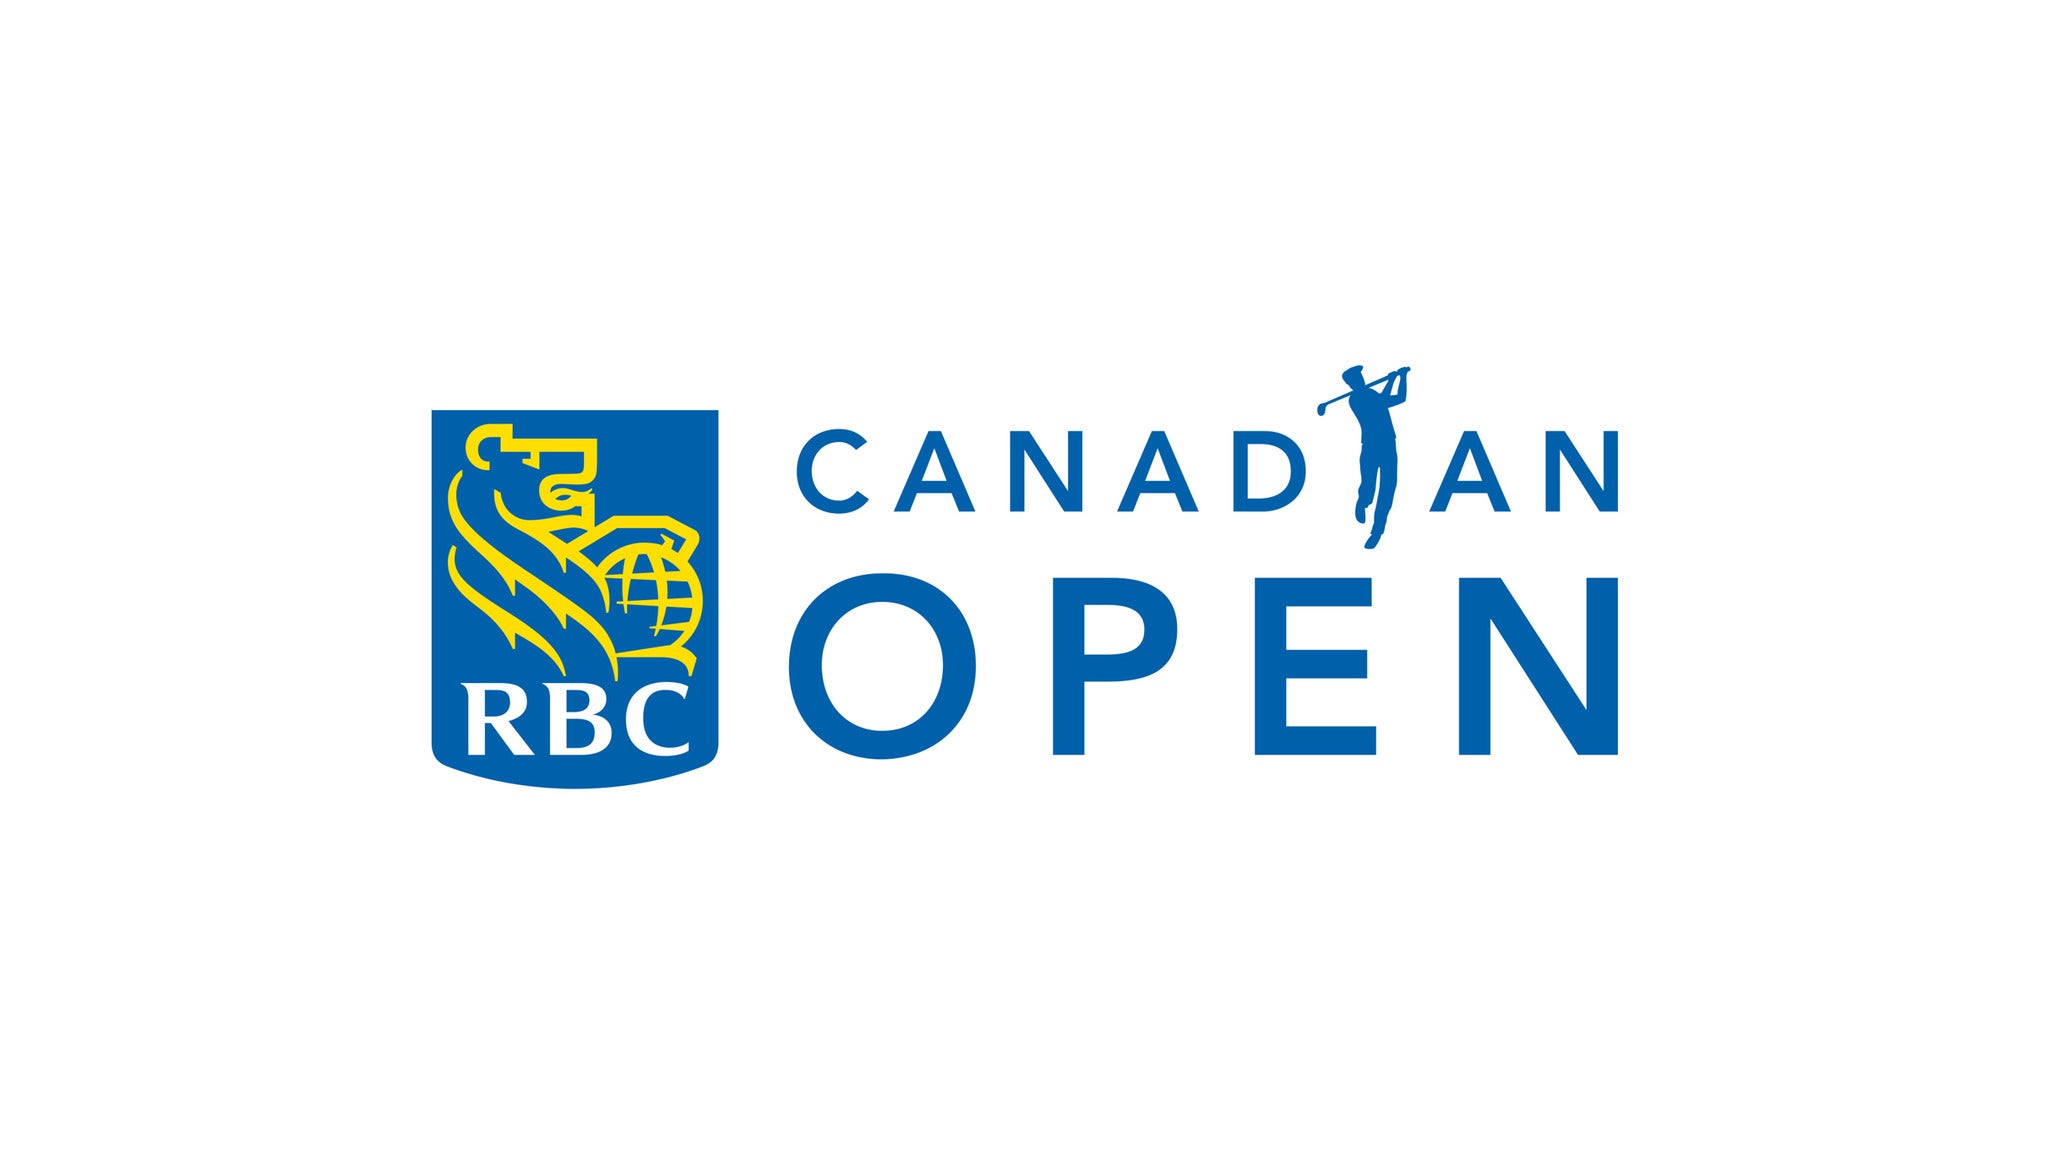 RBC Canadian Open - Thursday Admissions in Toronto promo photo for Golf Canada presale offer code